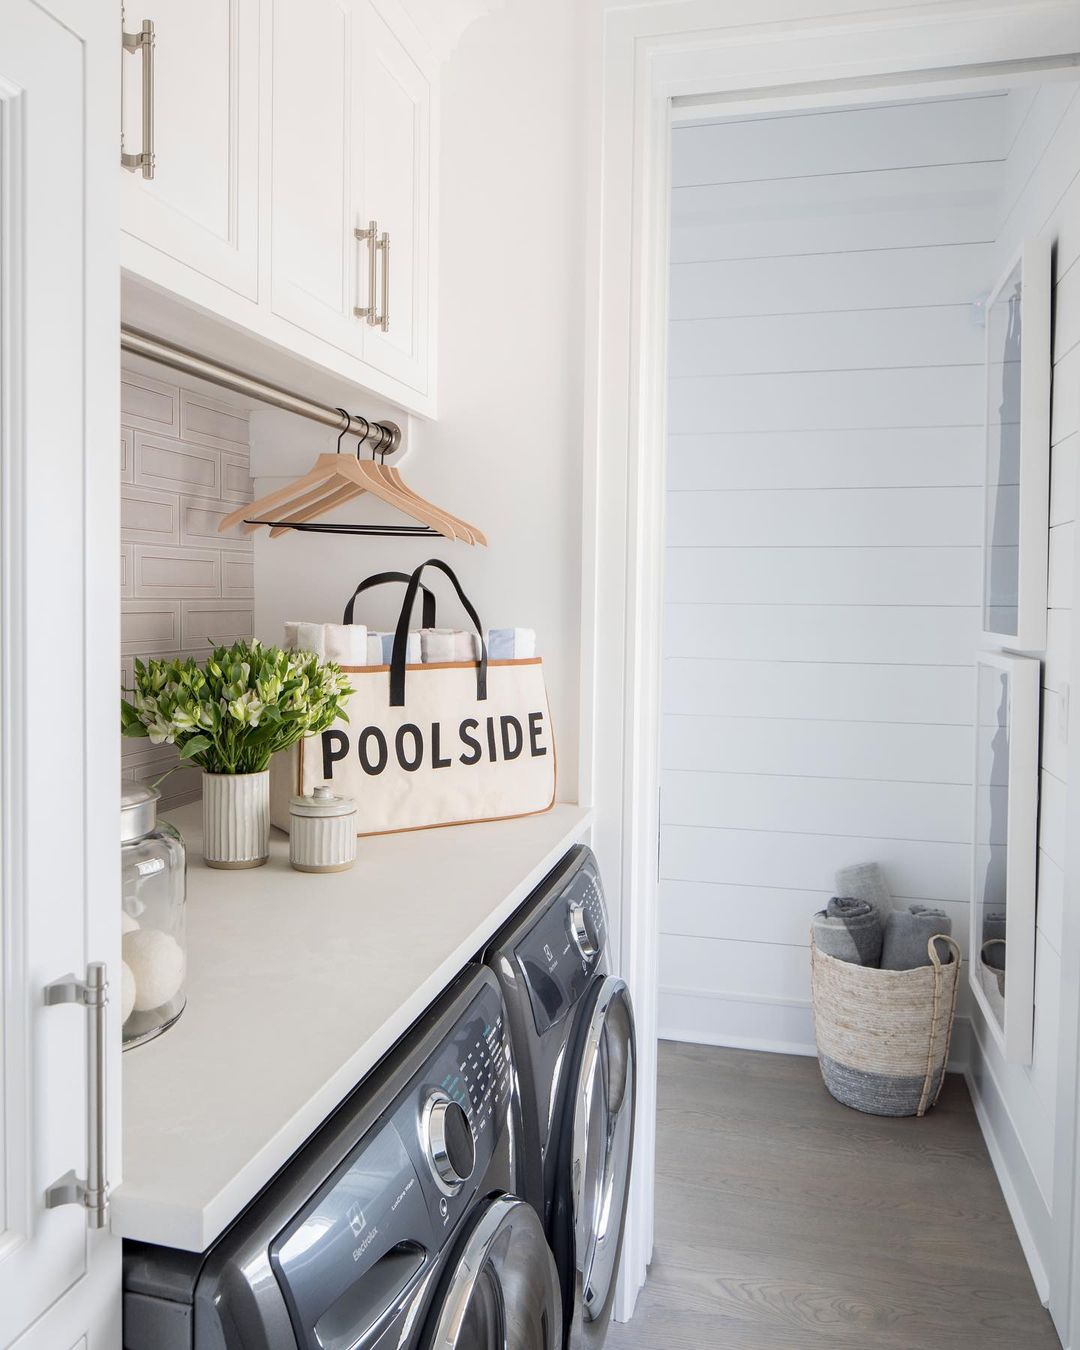 Poolside Prep in Luxurious Laundry Room